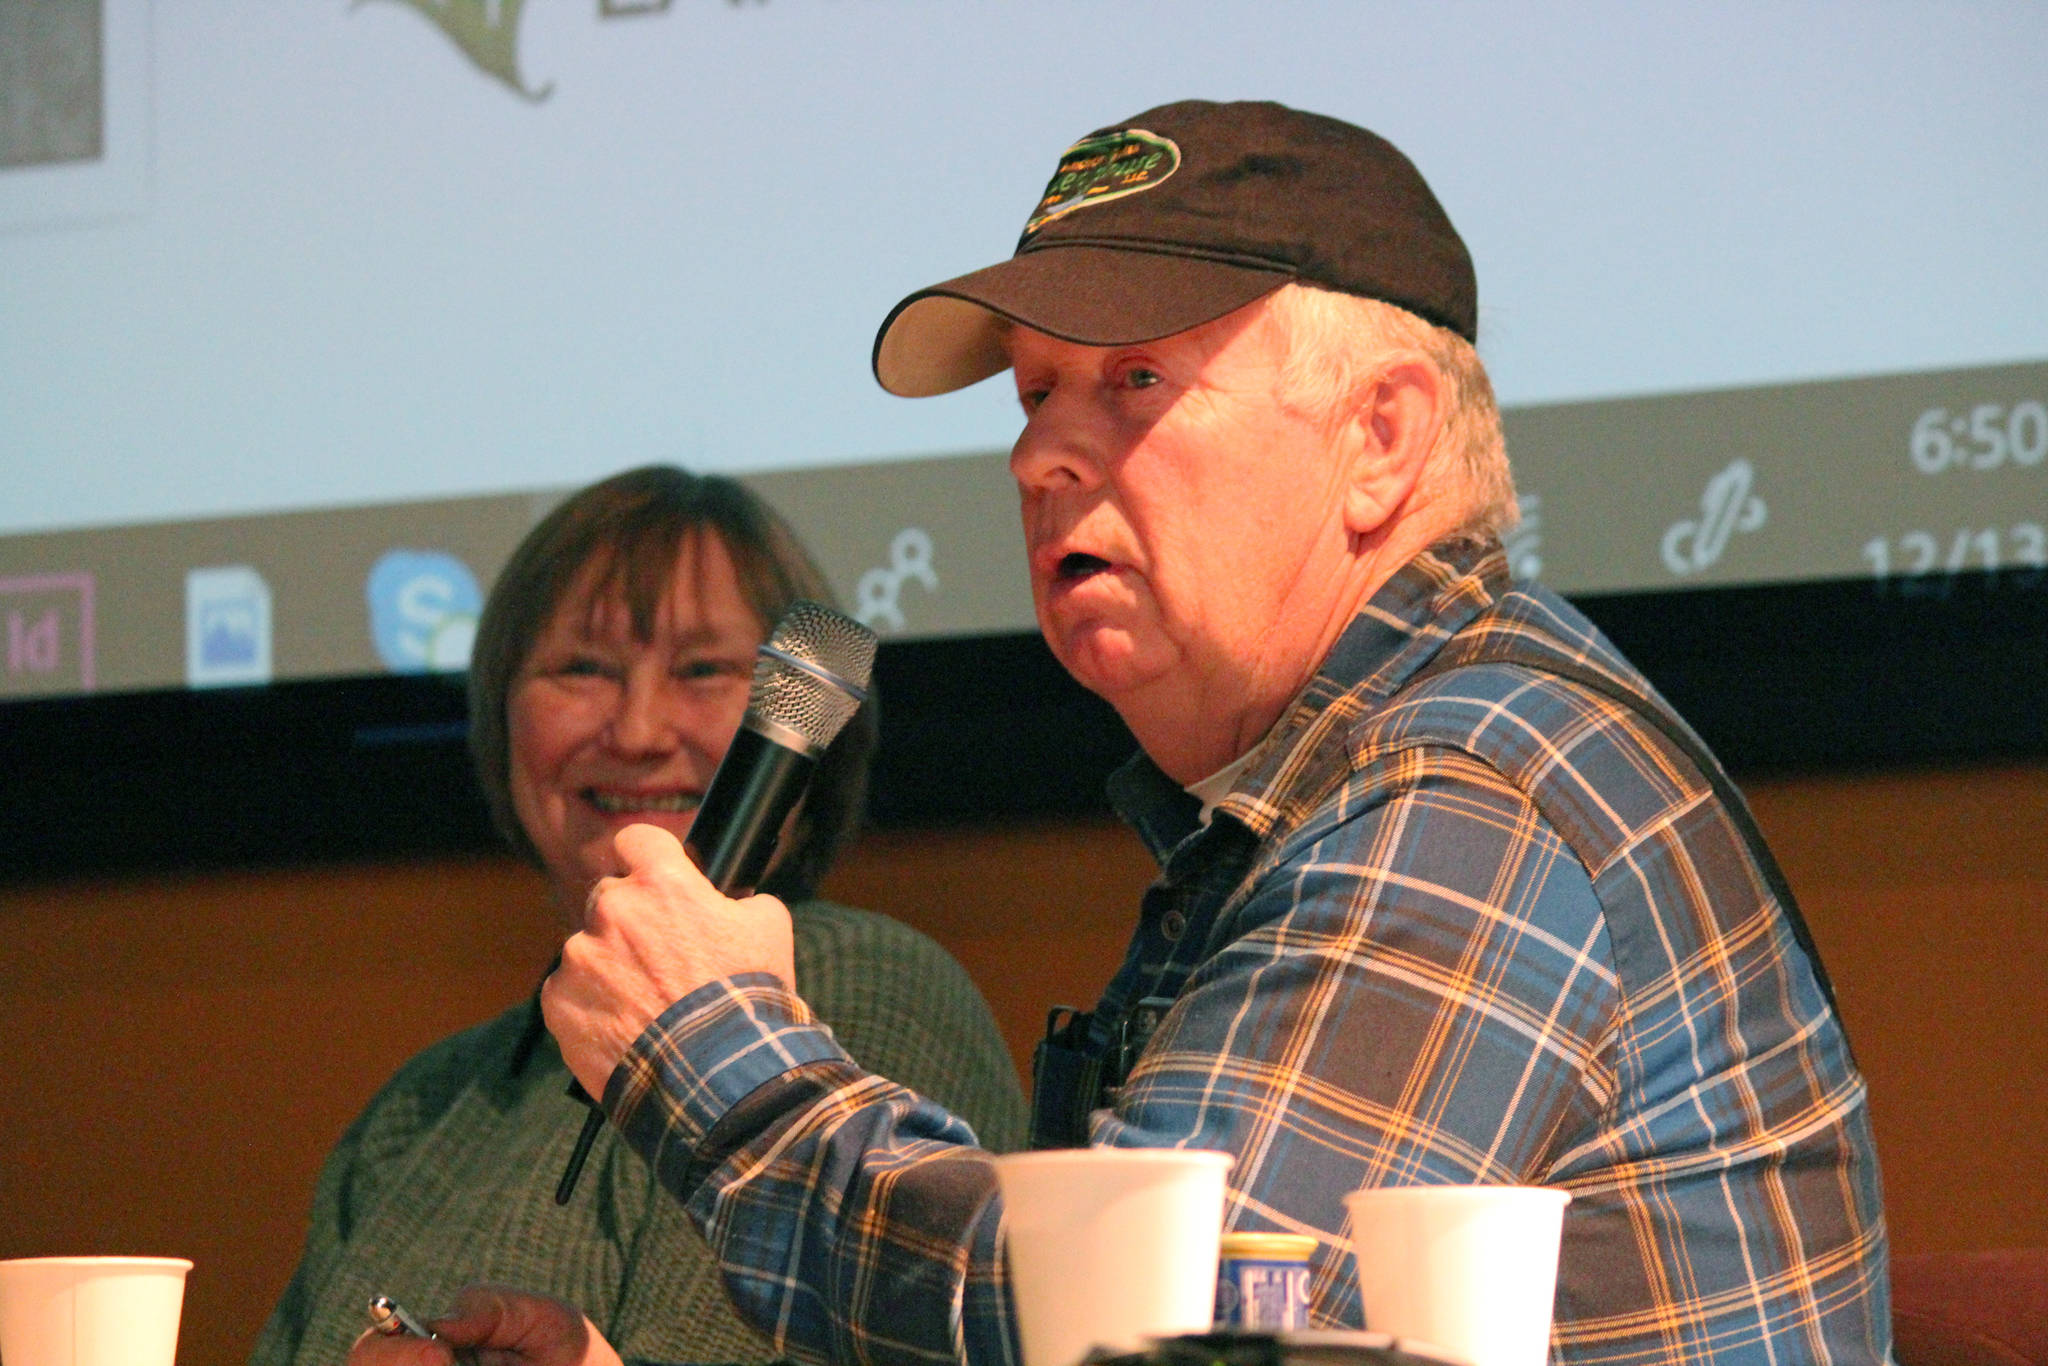 Al Poindexter addresses the crowd at a presentation of Homestead Kids: Tales from the North Fork on Thursday, Dec. 13, 2018 at the Alaska Islands and Oceans Center in Homer, Alaska. (Photo by Megan Pacer/Homer News)